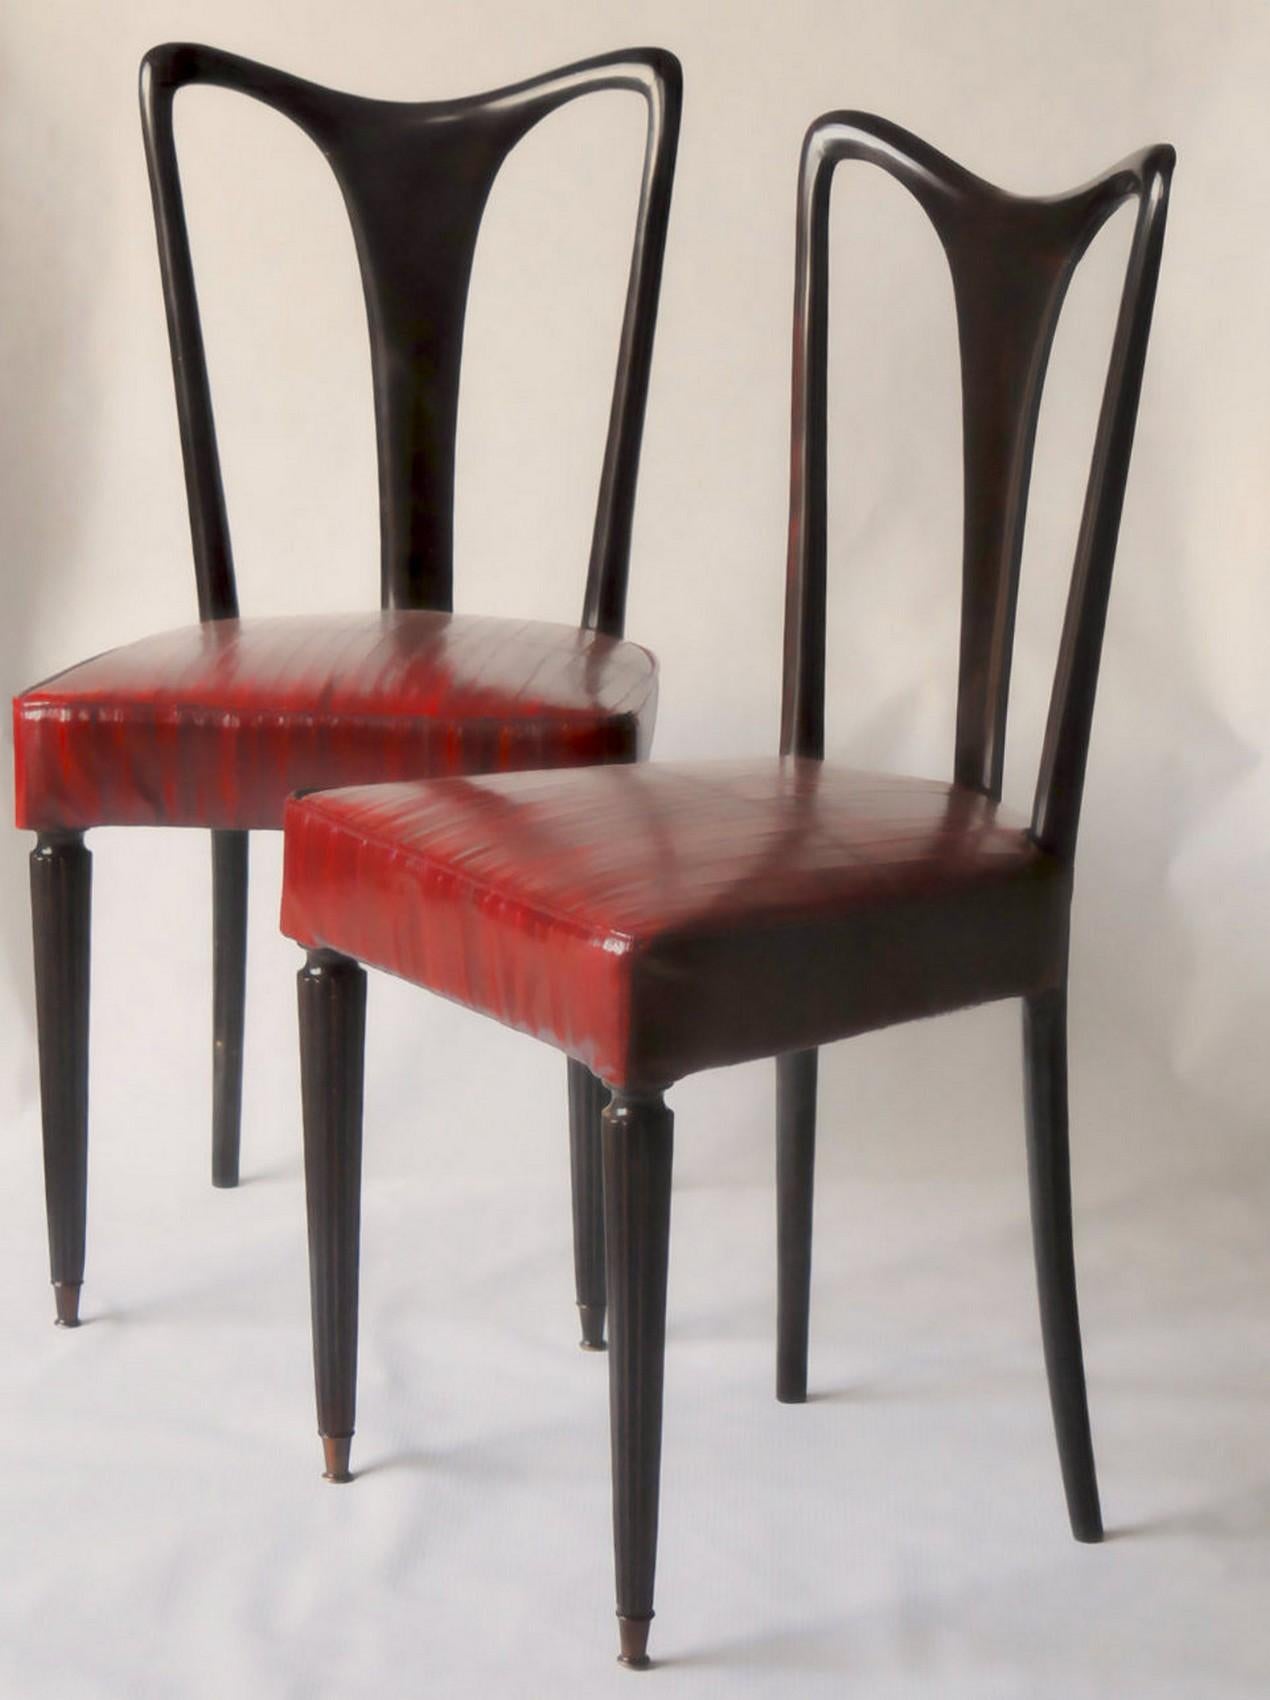 Rare set of six dining chairs. Back shows the outline that is commonly attributed to Guglielmo Ulrich.
There is a gorgeous carving on the curved top. It's not just following the outline of the back, but is scooped making a lip that witness high